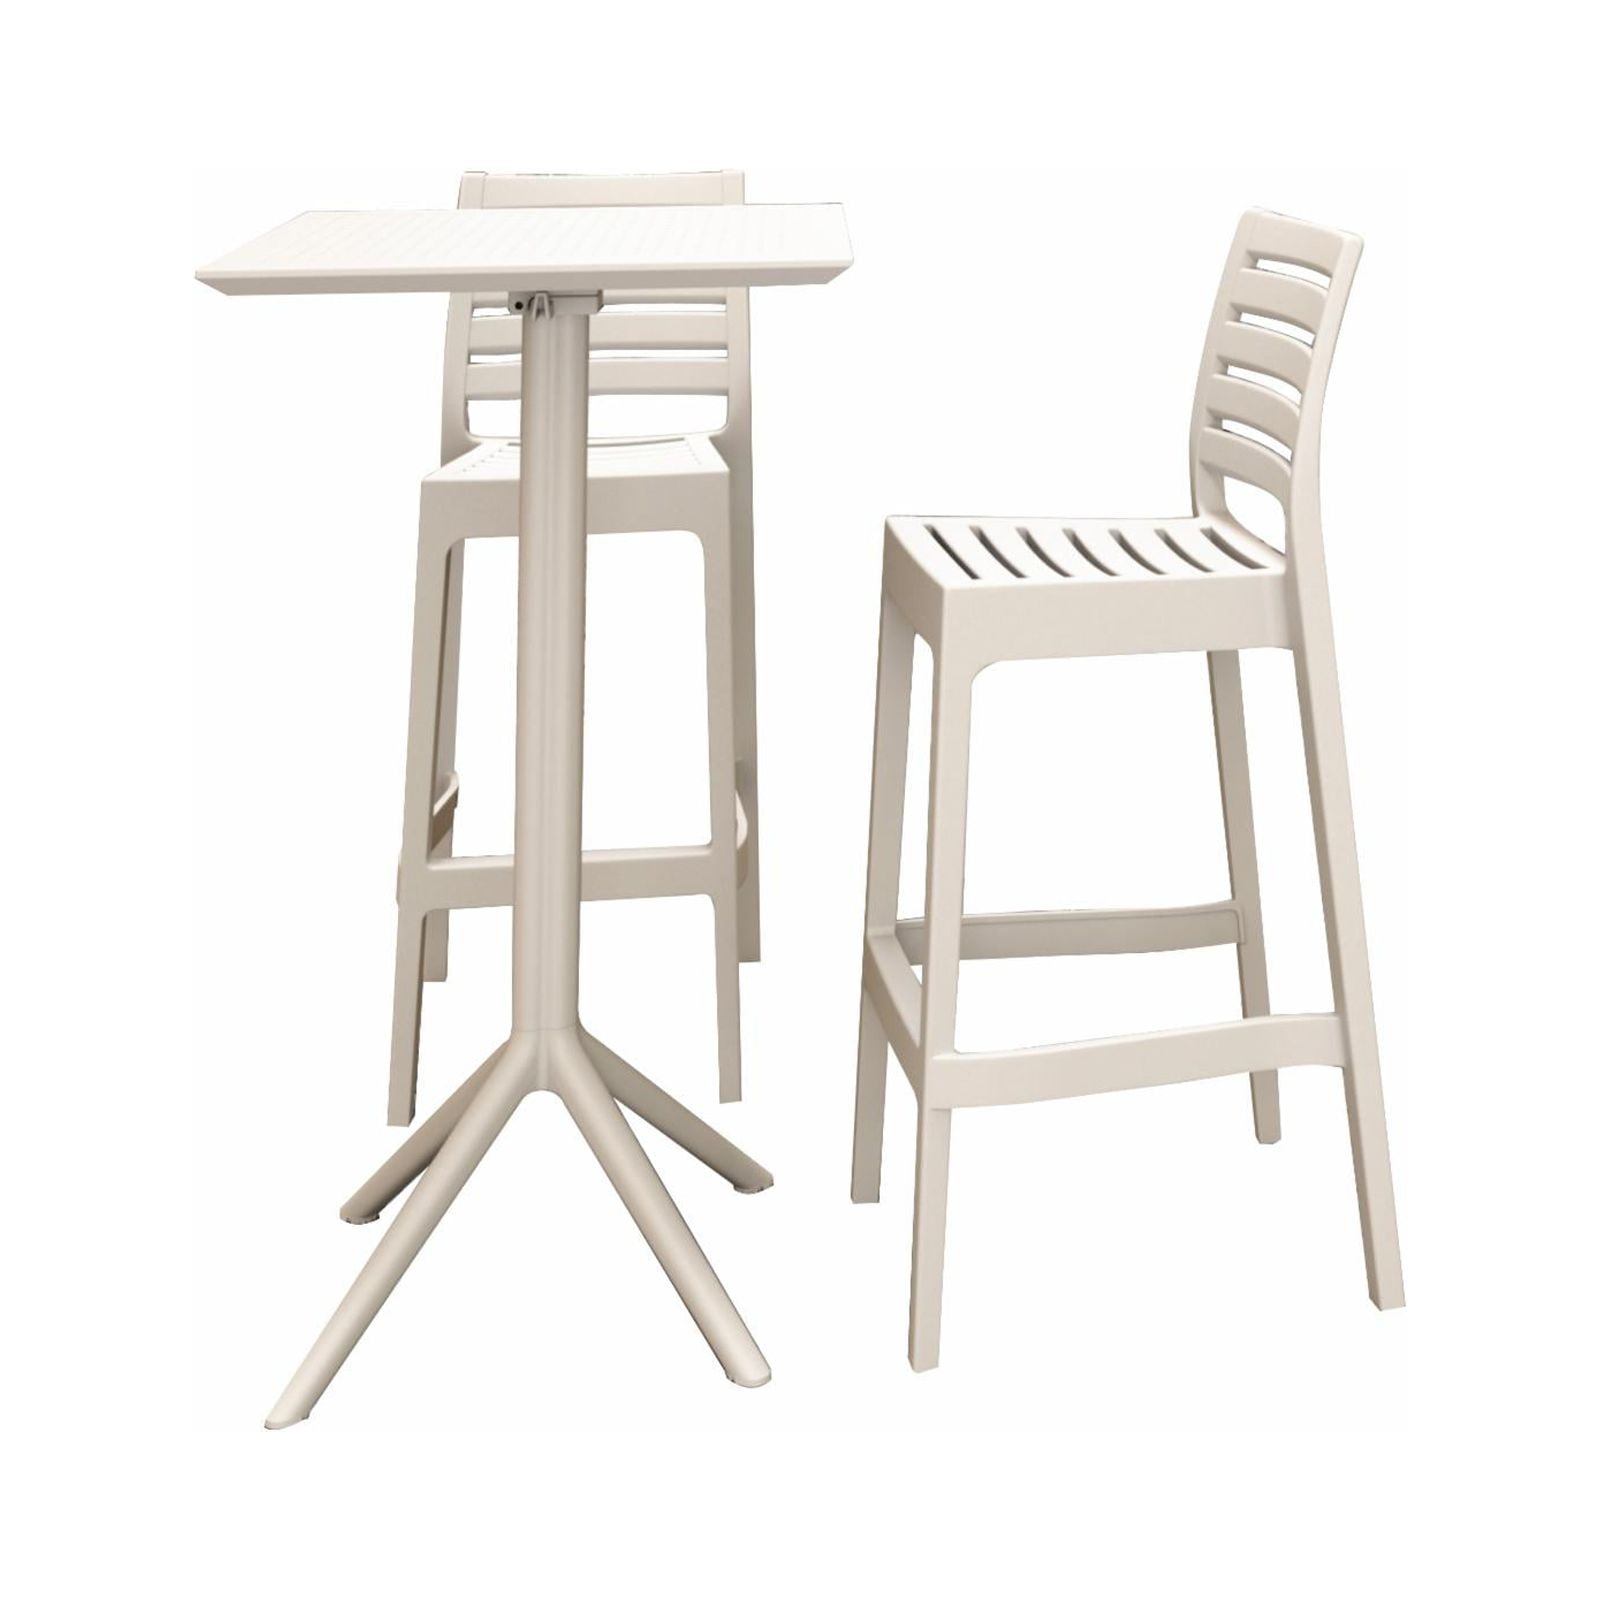 Isp1161s-whi Sky Ares Square Bar Set With 2 Barstools, White